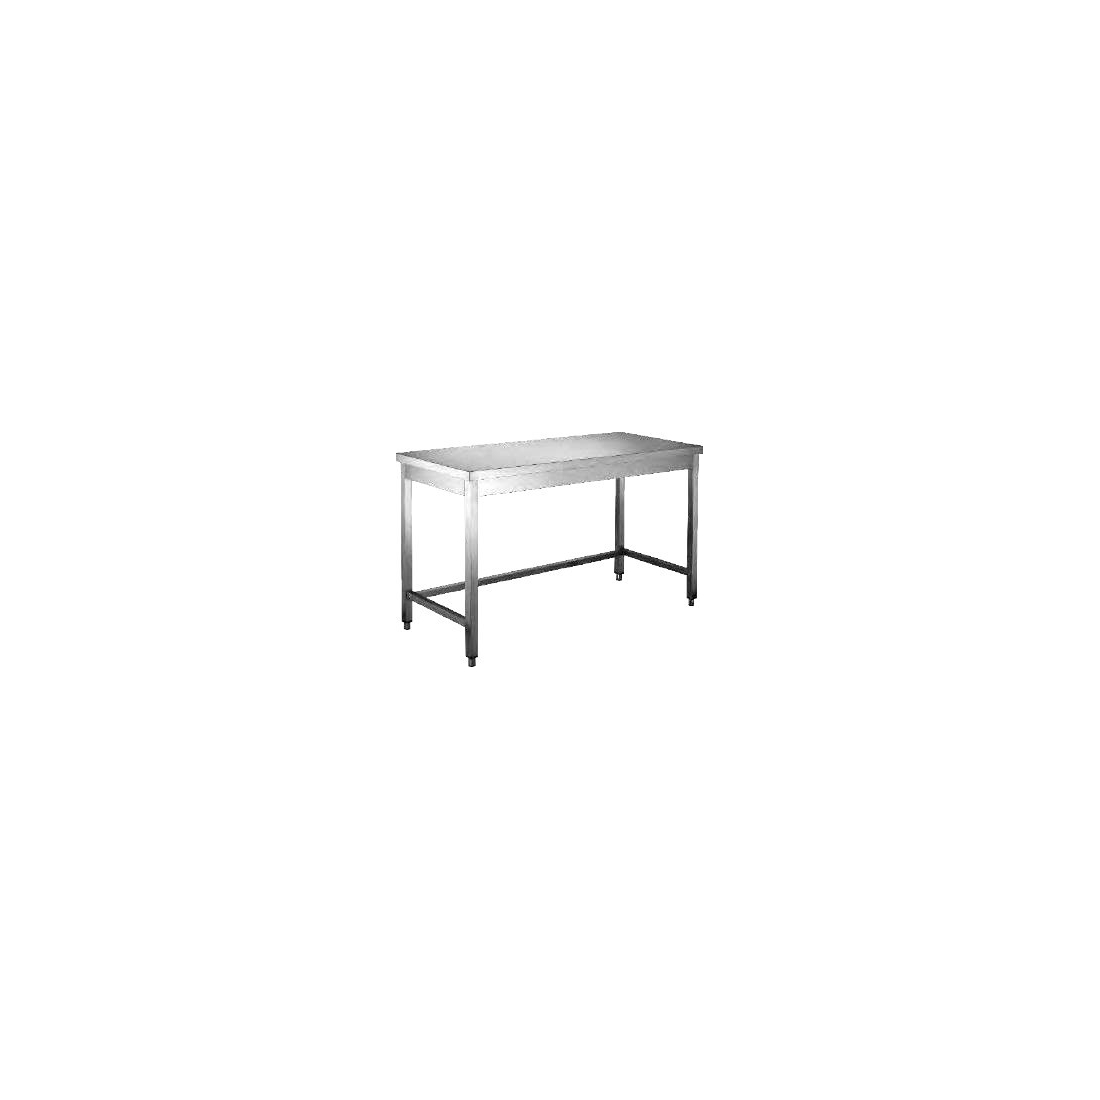 Stainless Steel Service Table 1.5m (WTD-151)|mkayn|مكاين